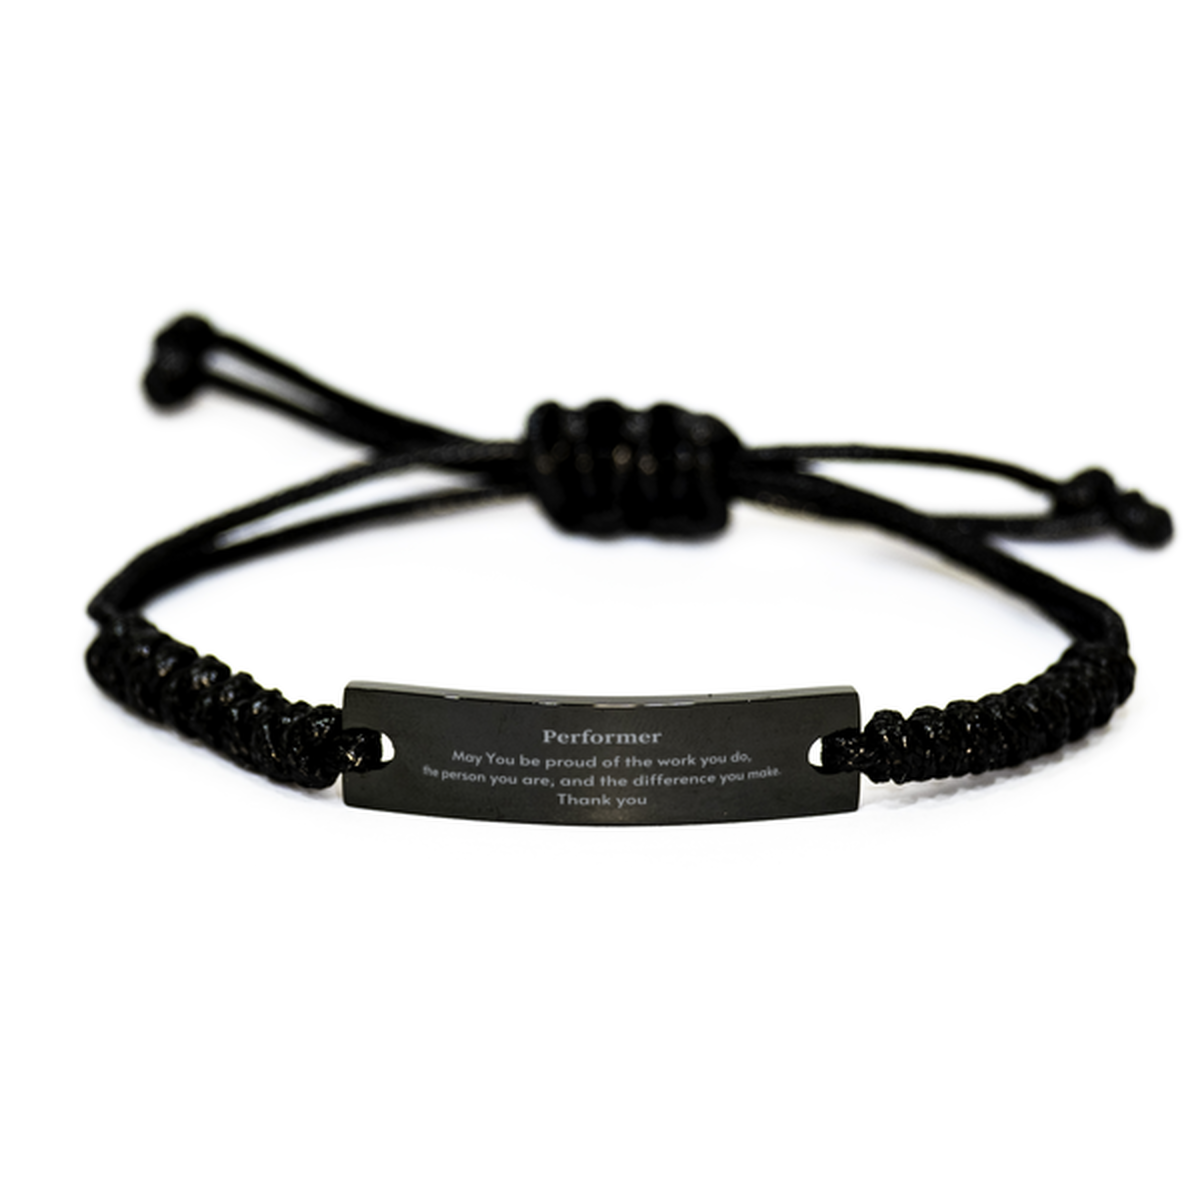 Heartwarming Black Rope Bracelet Retirement Coworkers Gifts for Performer, Performer May You be proud of the work you do, the person you are Gifts for Boss Men Women Friends